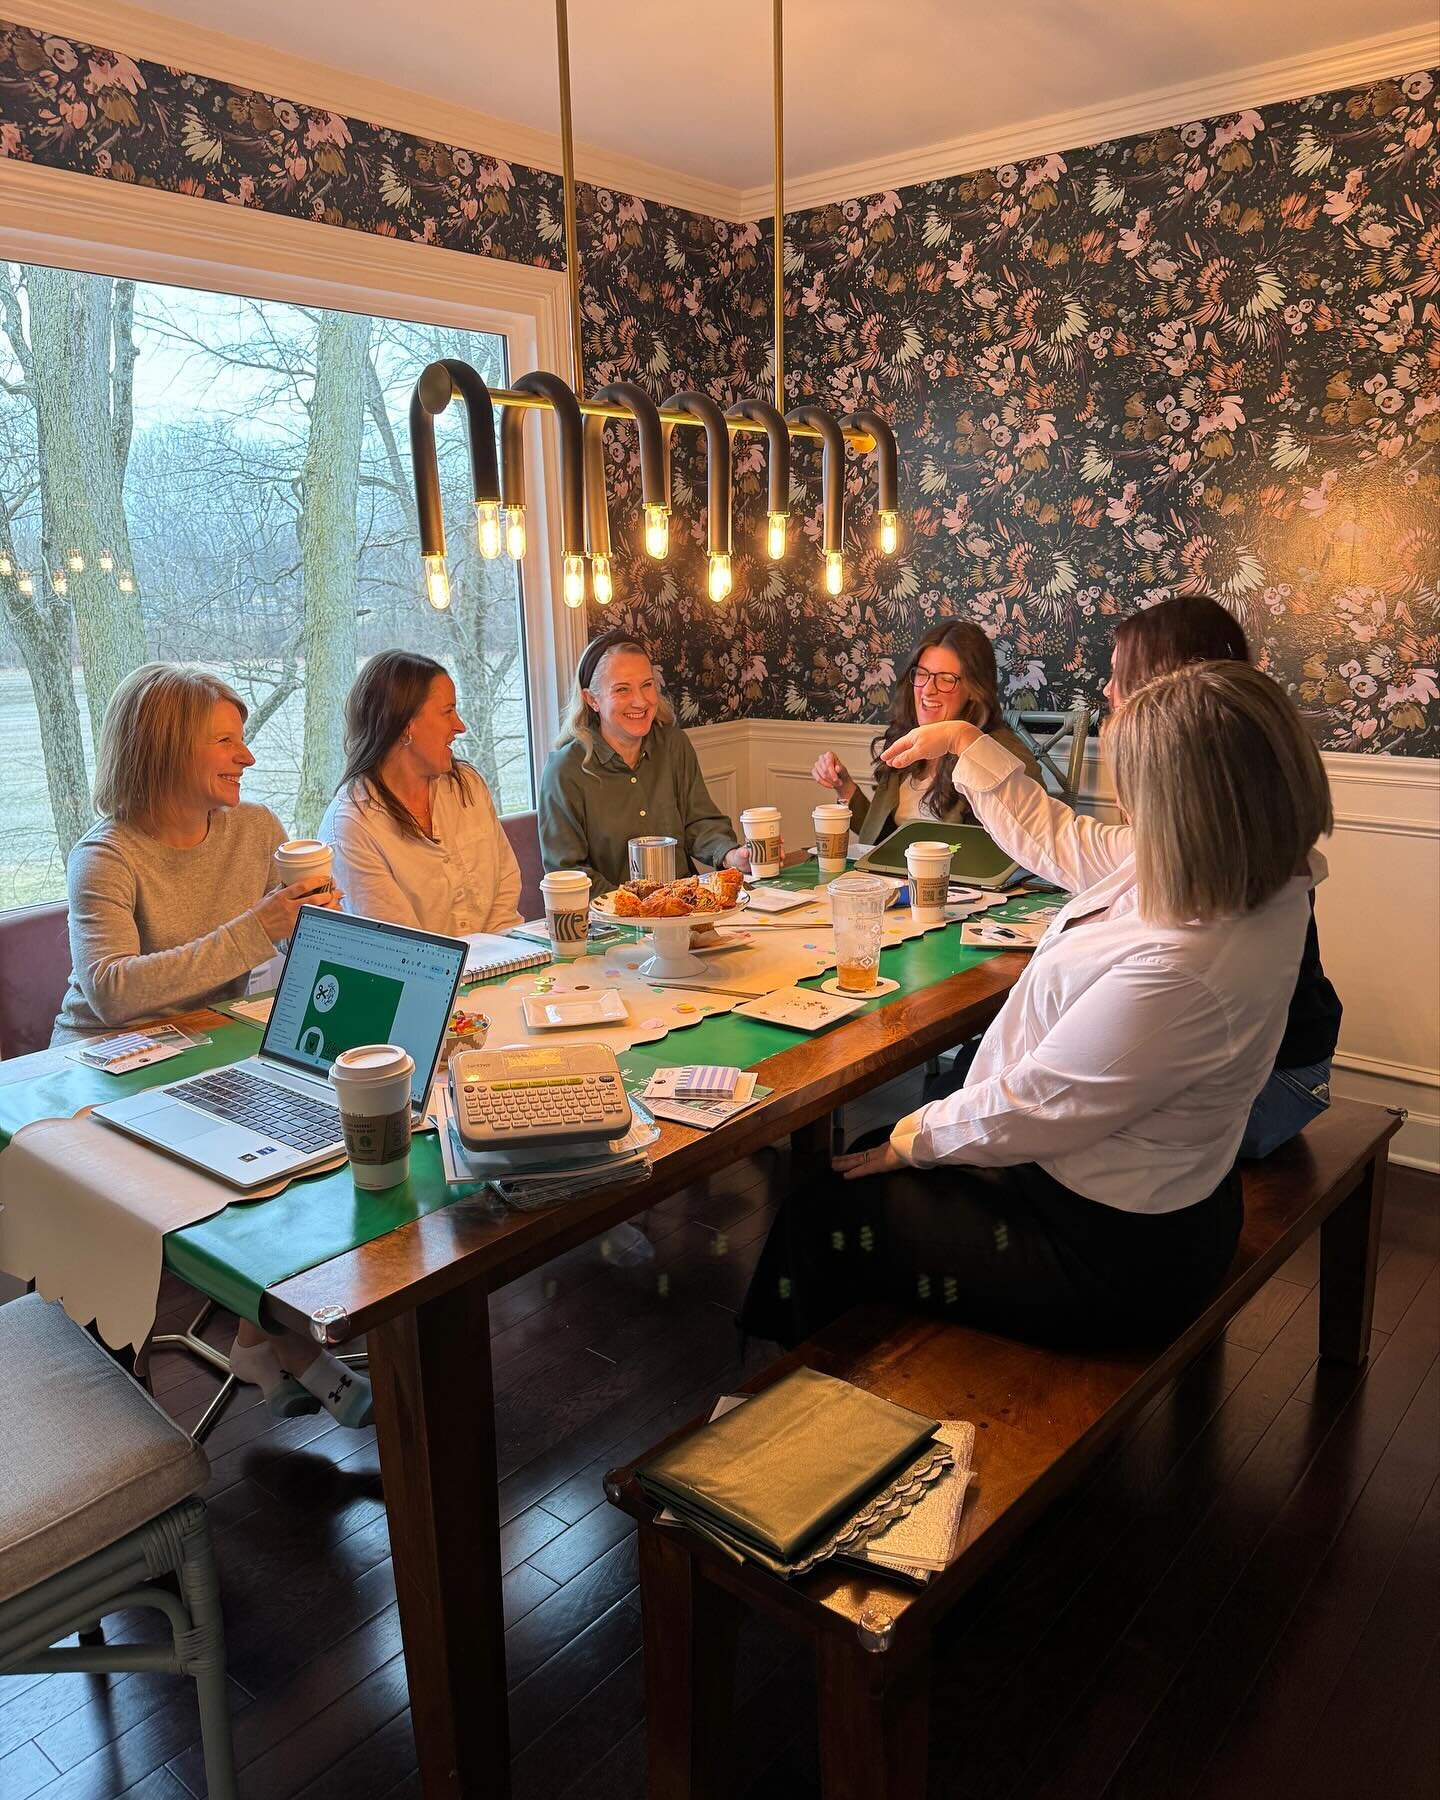 Feeling so proud of the team we&rsquo;ve built! This morning all seven of us got together to eat @ameliasbread pastries, sharpen our skills, talk about upcoming projects and of course, laugh!

Each of these women take time away from their busy lives 